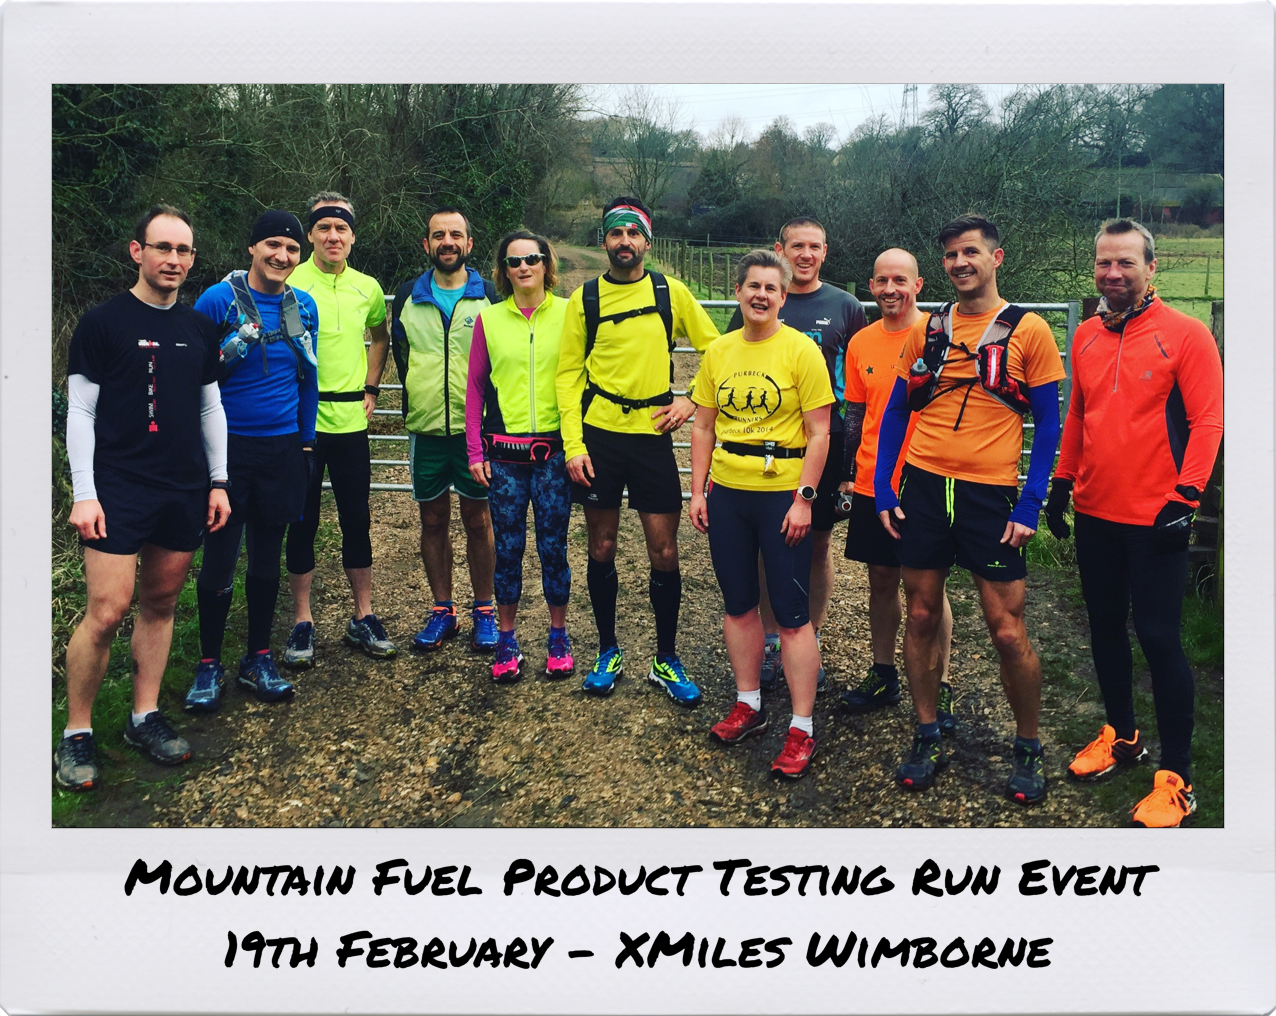 Mountain Fuel Product Testing Run Event